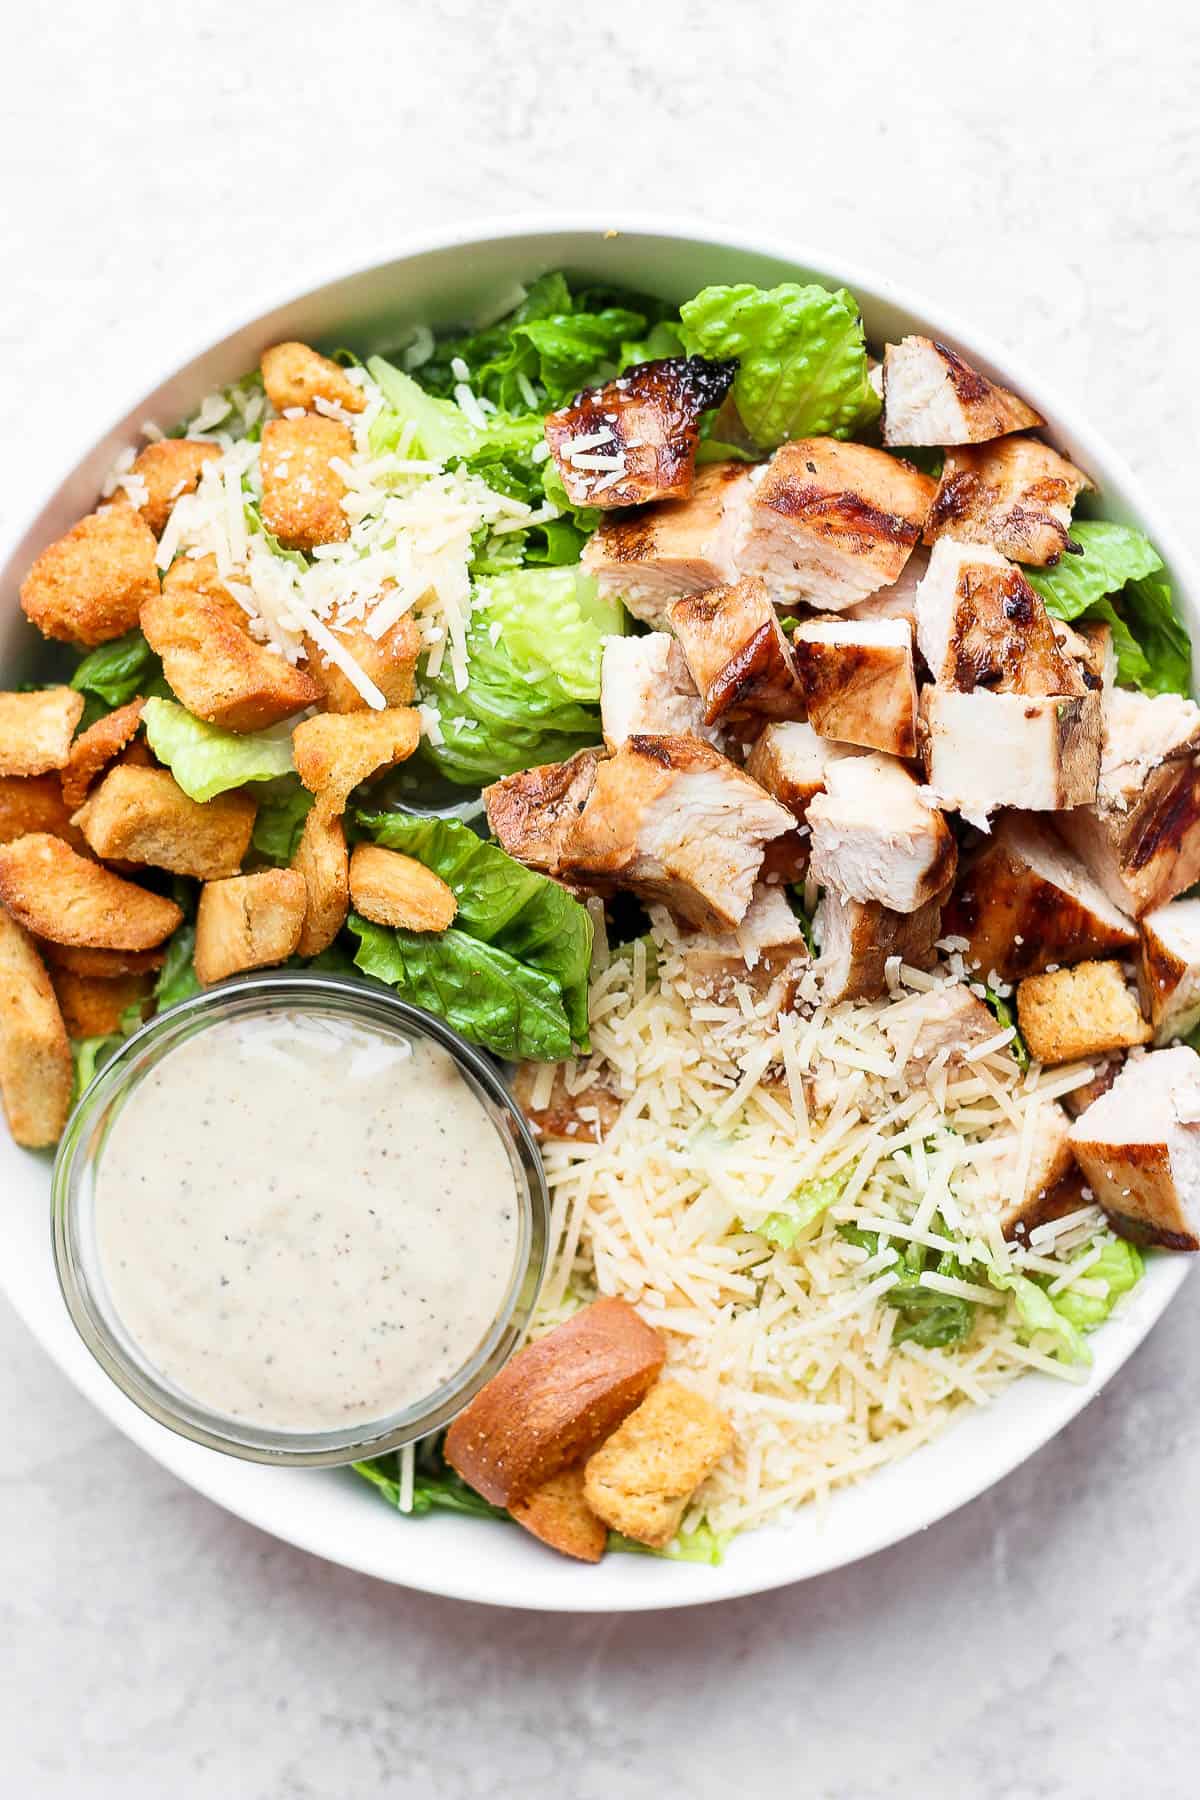 Grilled chicken caesar salad with a small dish of caesar dressing.